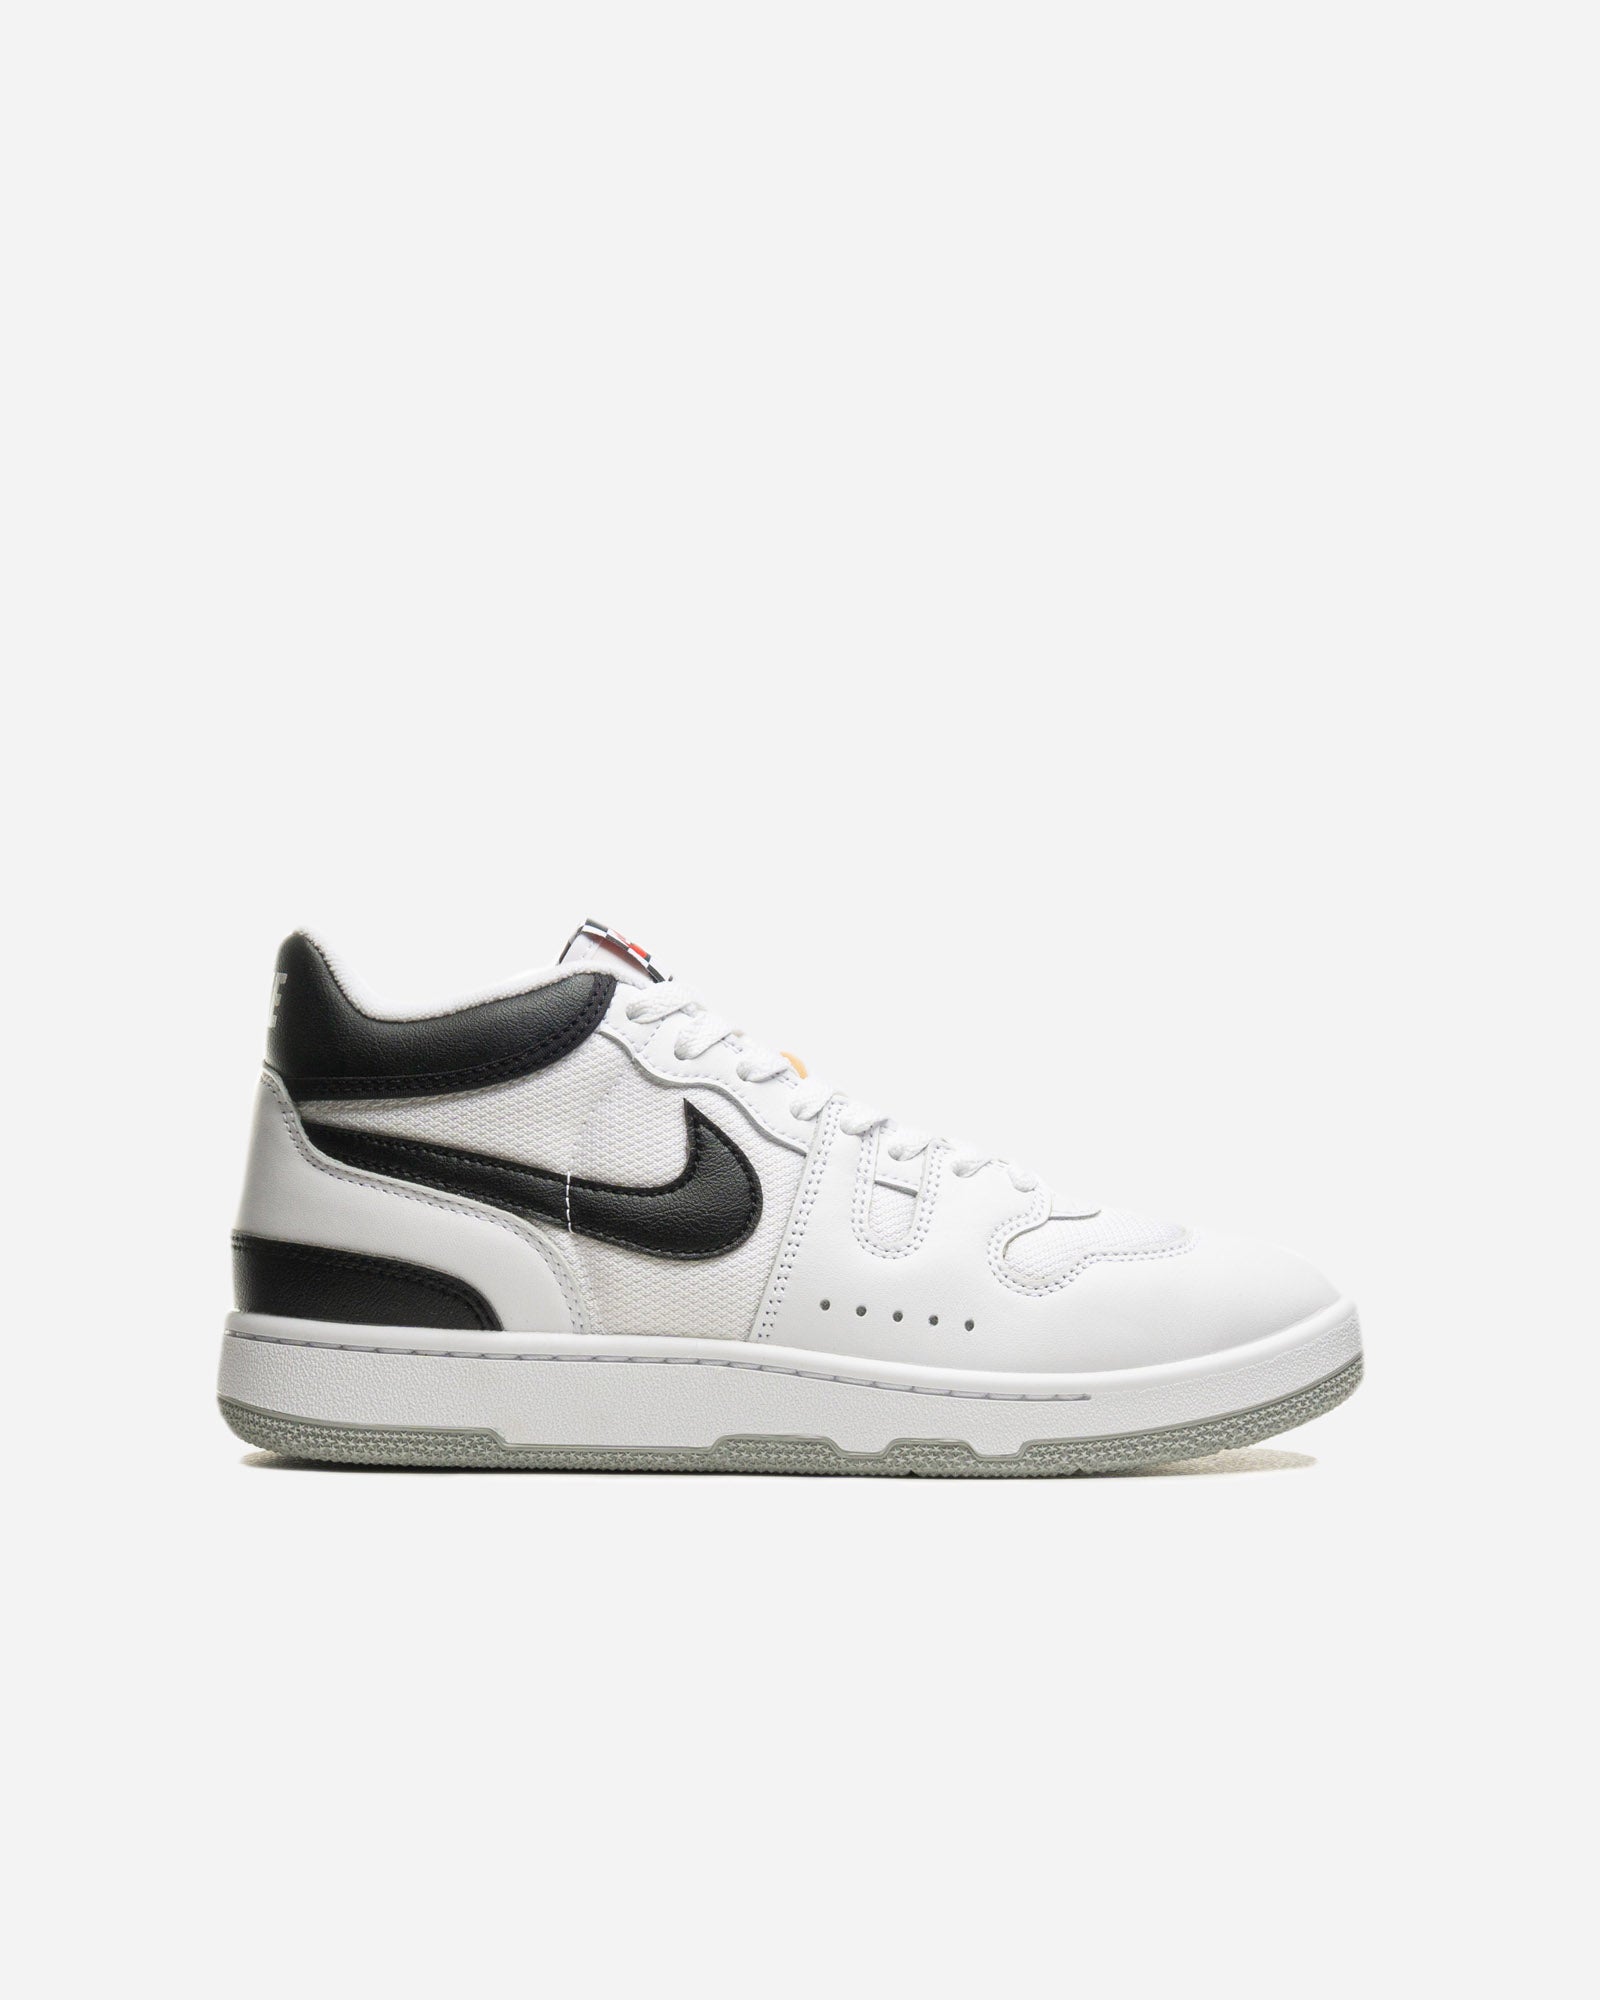 Nike Attack QS SP image